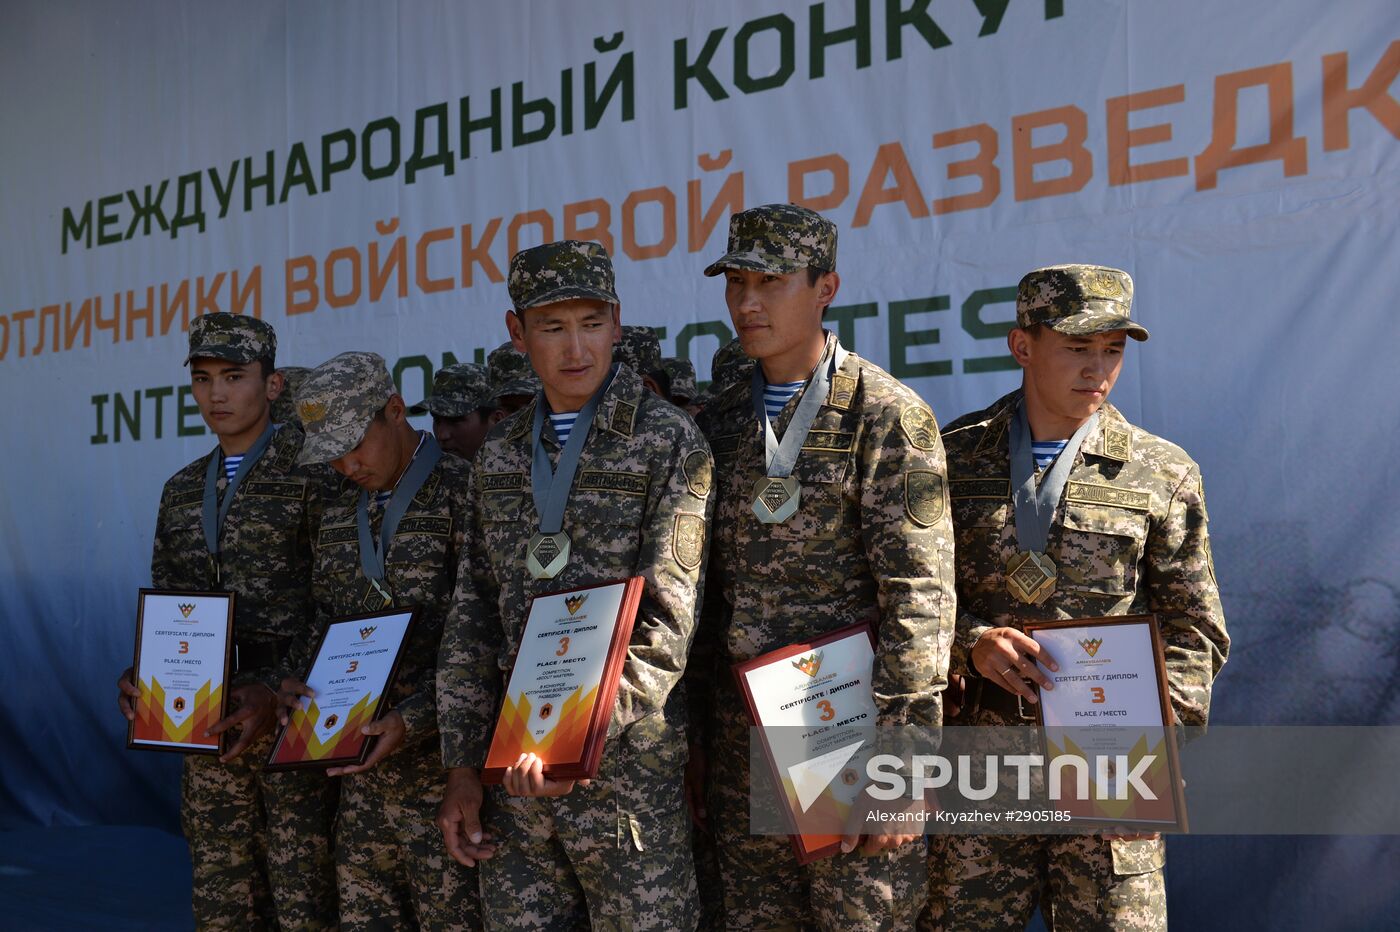 Closing ceremony of Masters of Reconnaissance competition in Novosibirsk Region